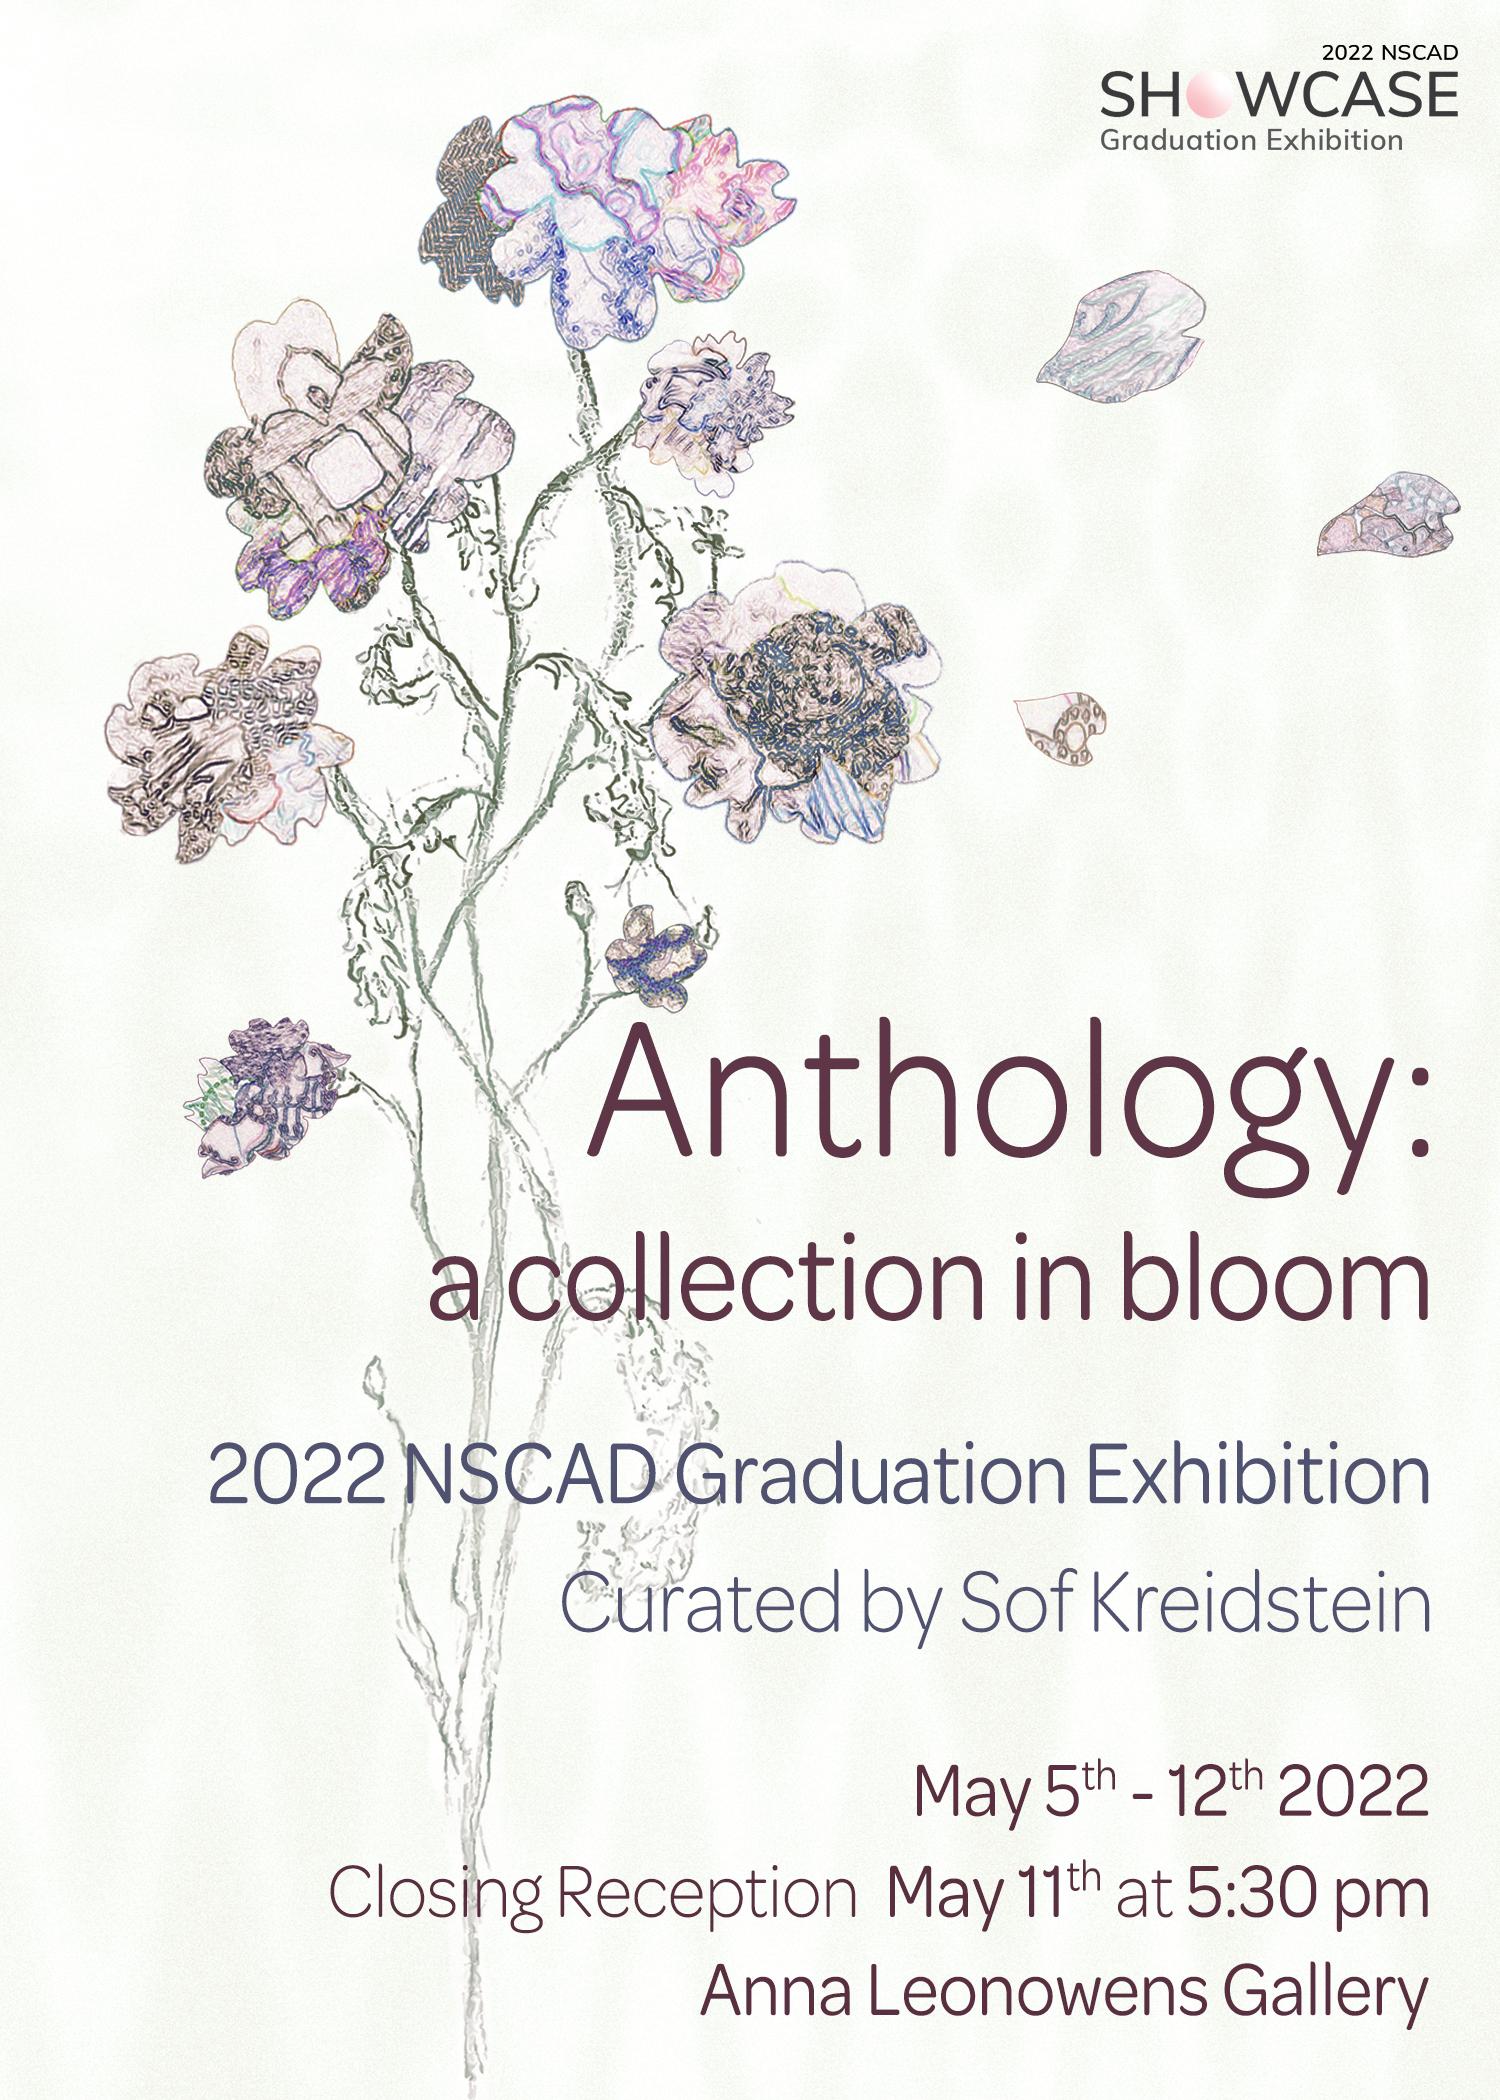 Promotional image for the 2022 NSCAD Graduation Exhibition with an illustration of a multi-textured/coloured wildflower.